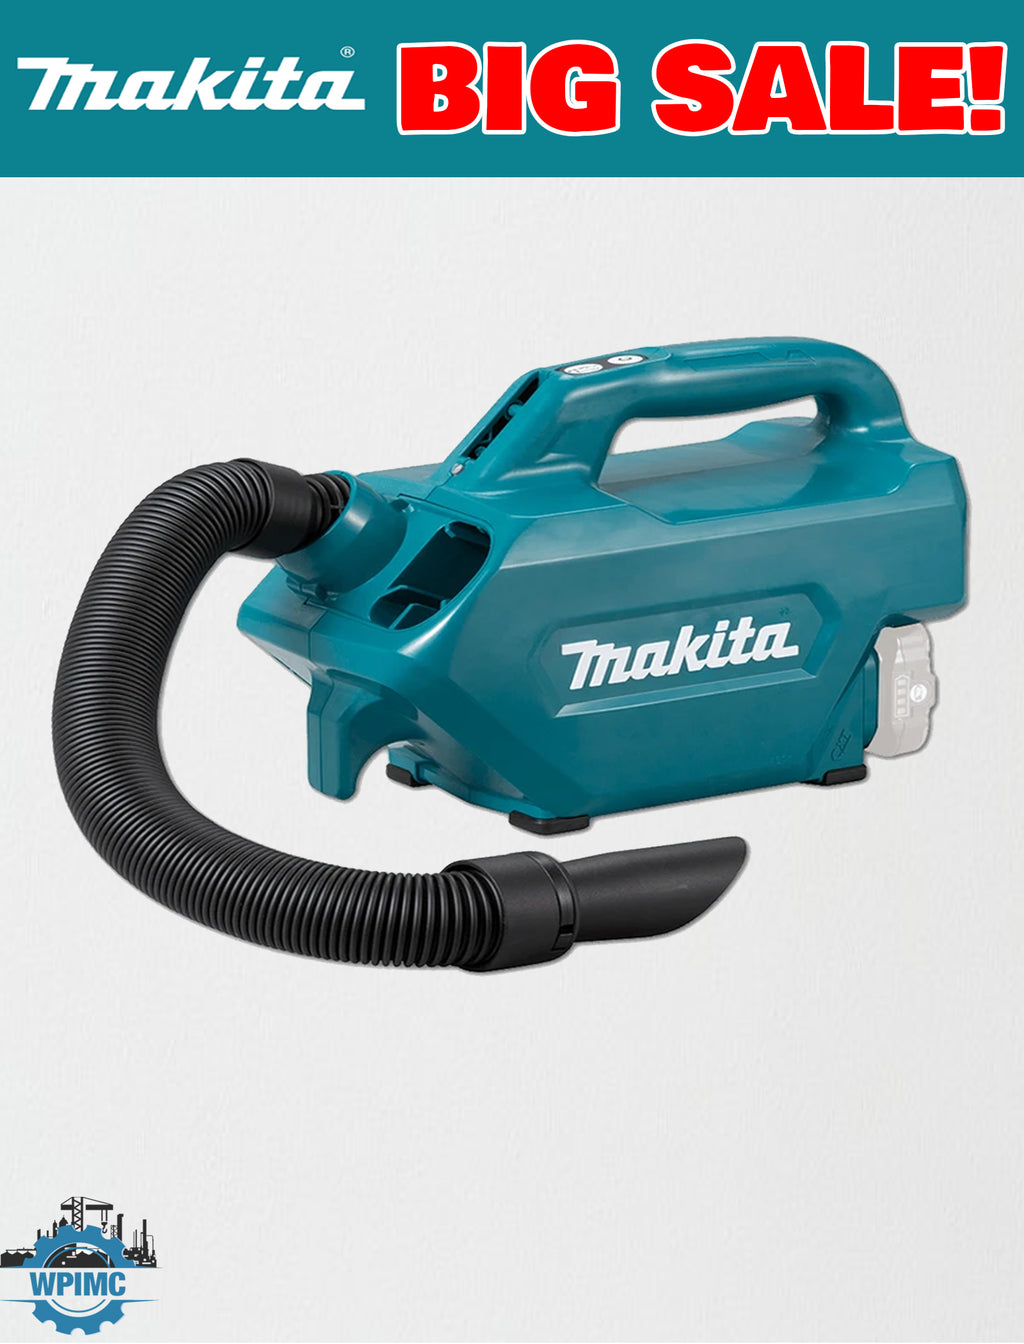 MAKITA CORDLESS CLEANER CL121DZ